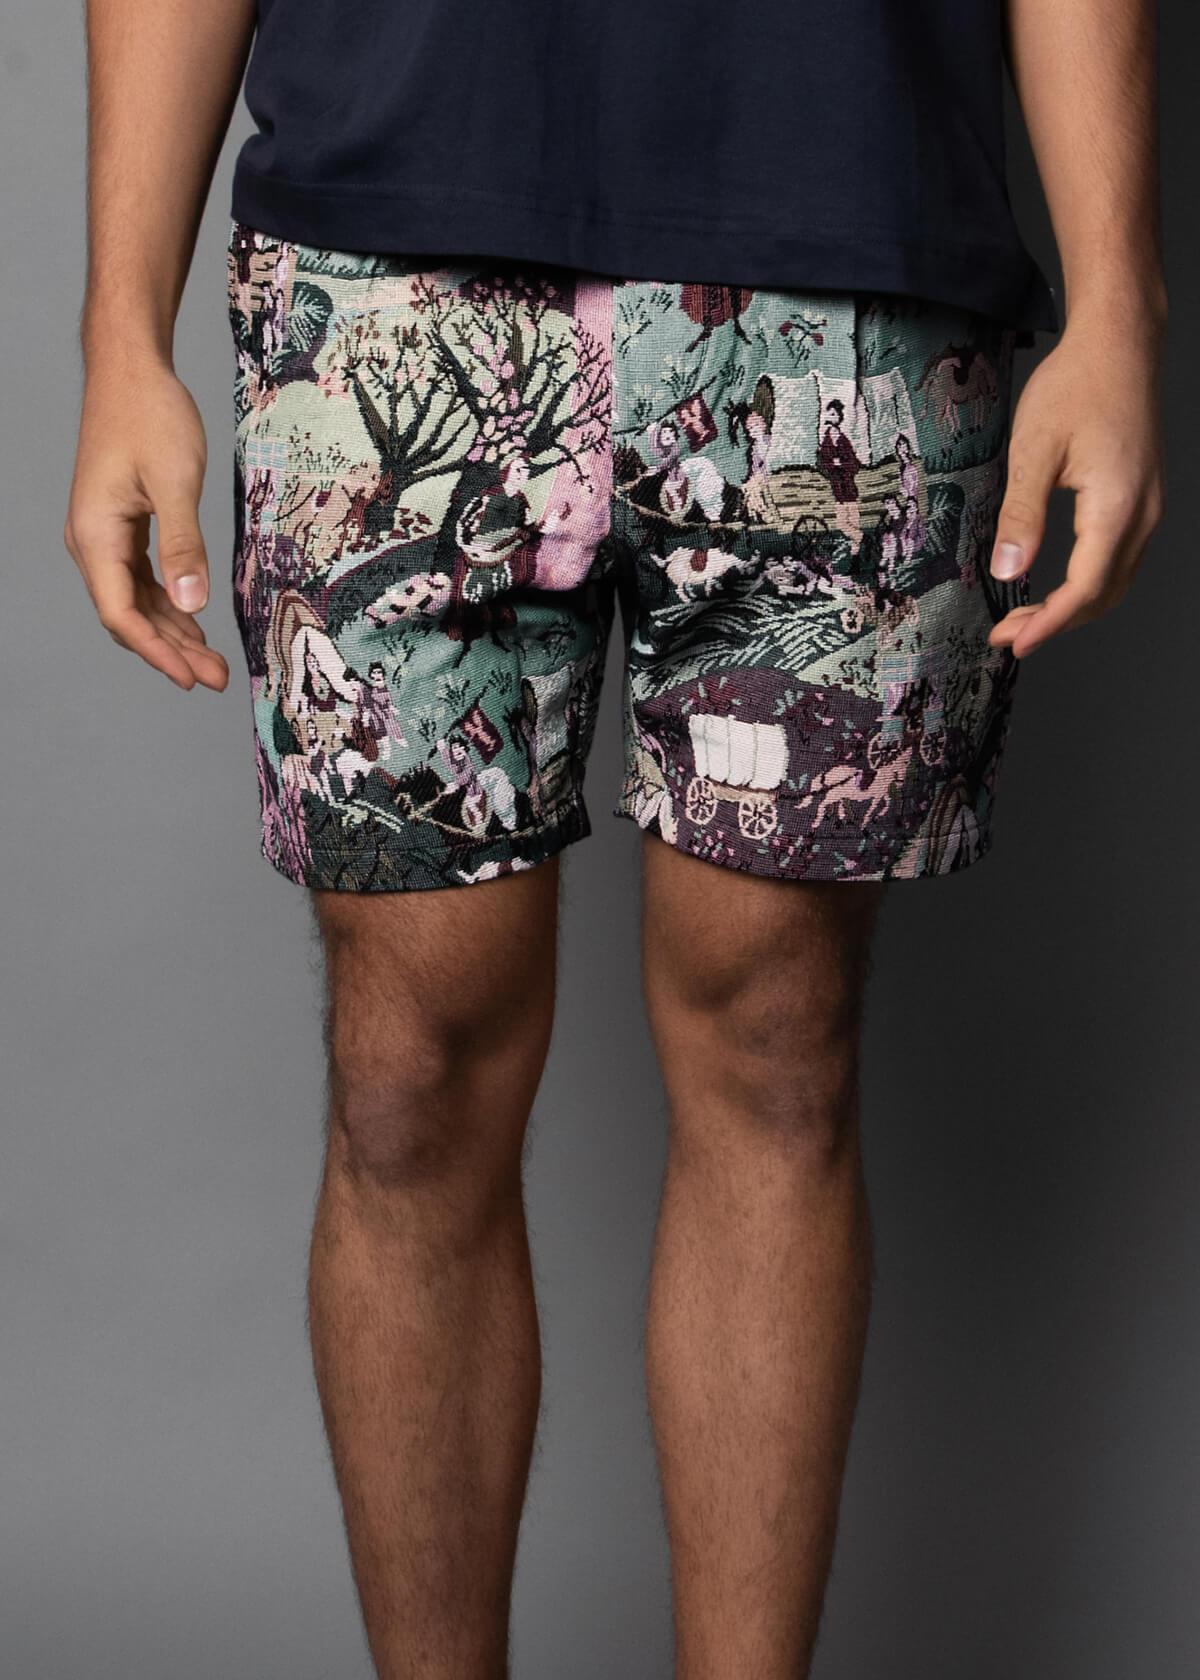 Pastoral Jacquard men's shorts with a french countryside pattern